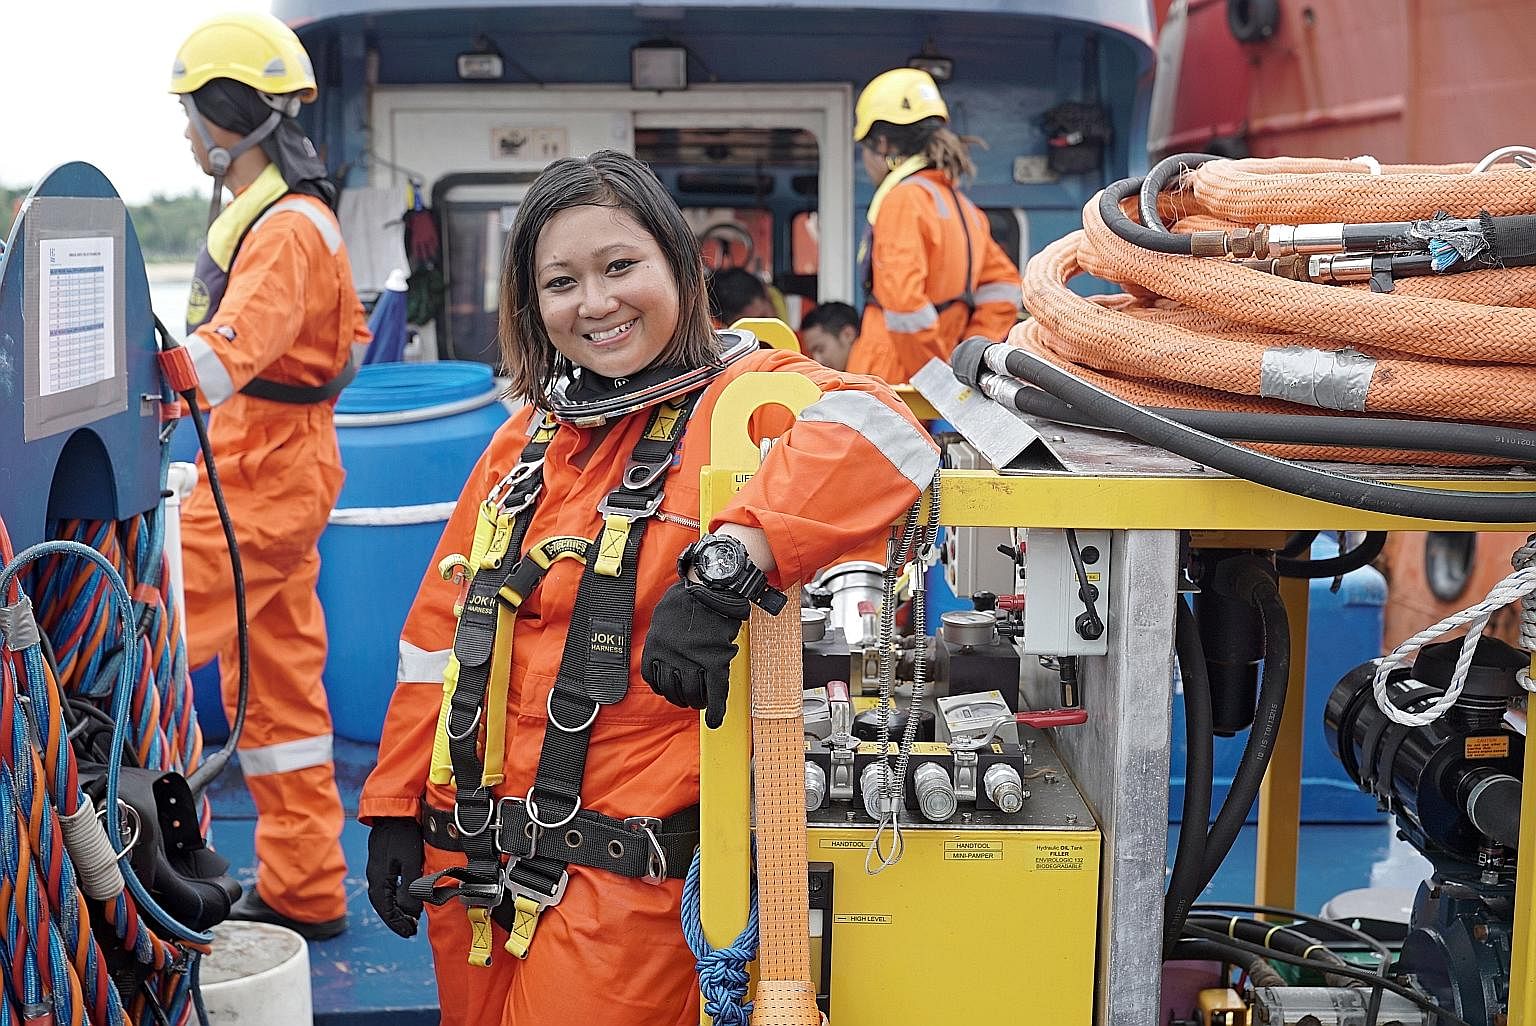 Ms Siti Naqiah Tusliman is the first female diver here certified to use specialised diving gear known as Surface-Supplied Diving Equipment for work purposes in Singapore waters. She joined an elite club of 63 divers who have attained the highest stan